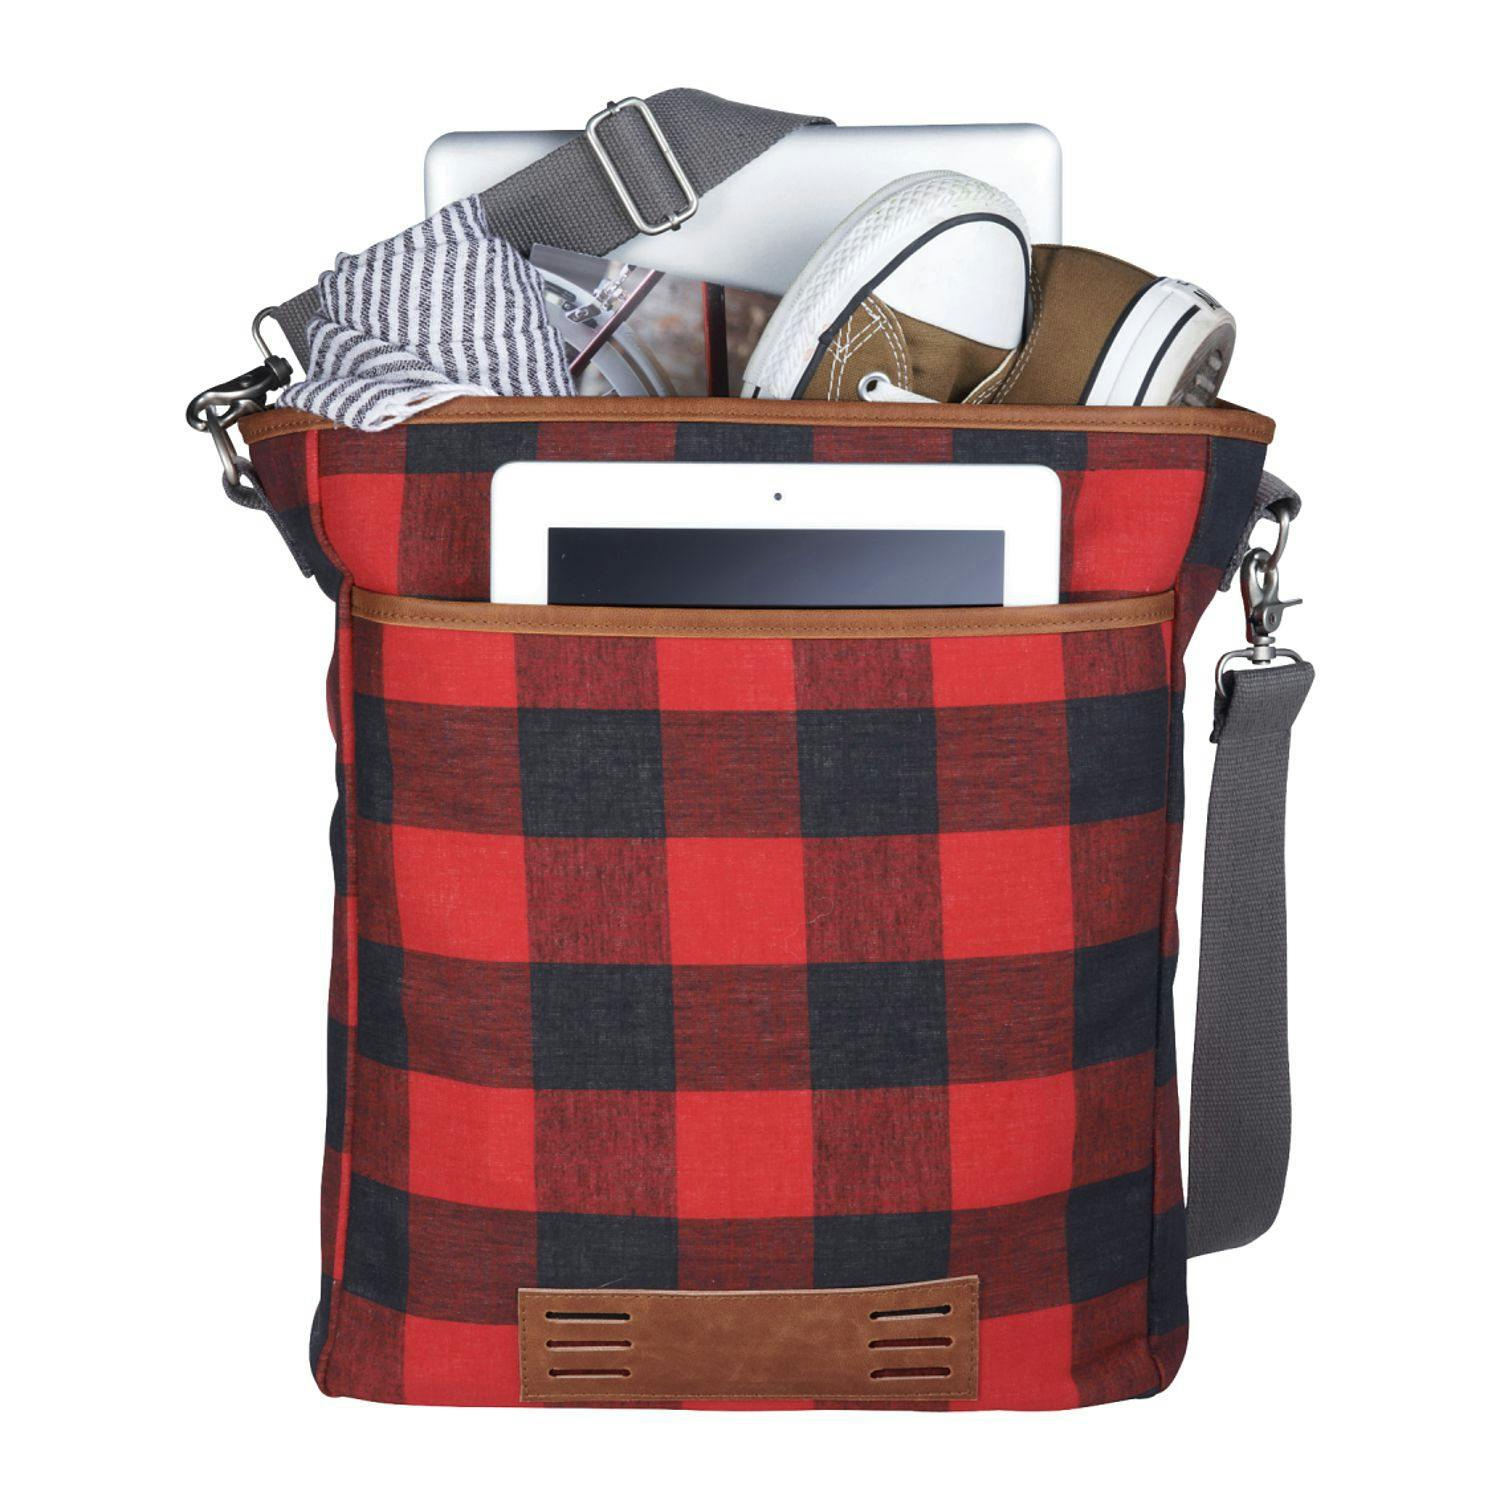 Field & Co.® Campster 15" Computer Tote - additional Image 2